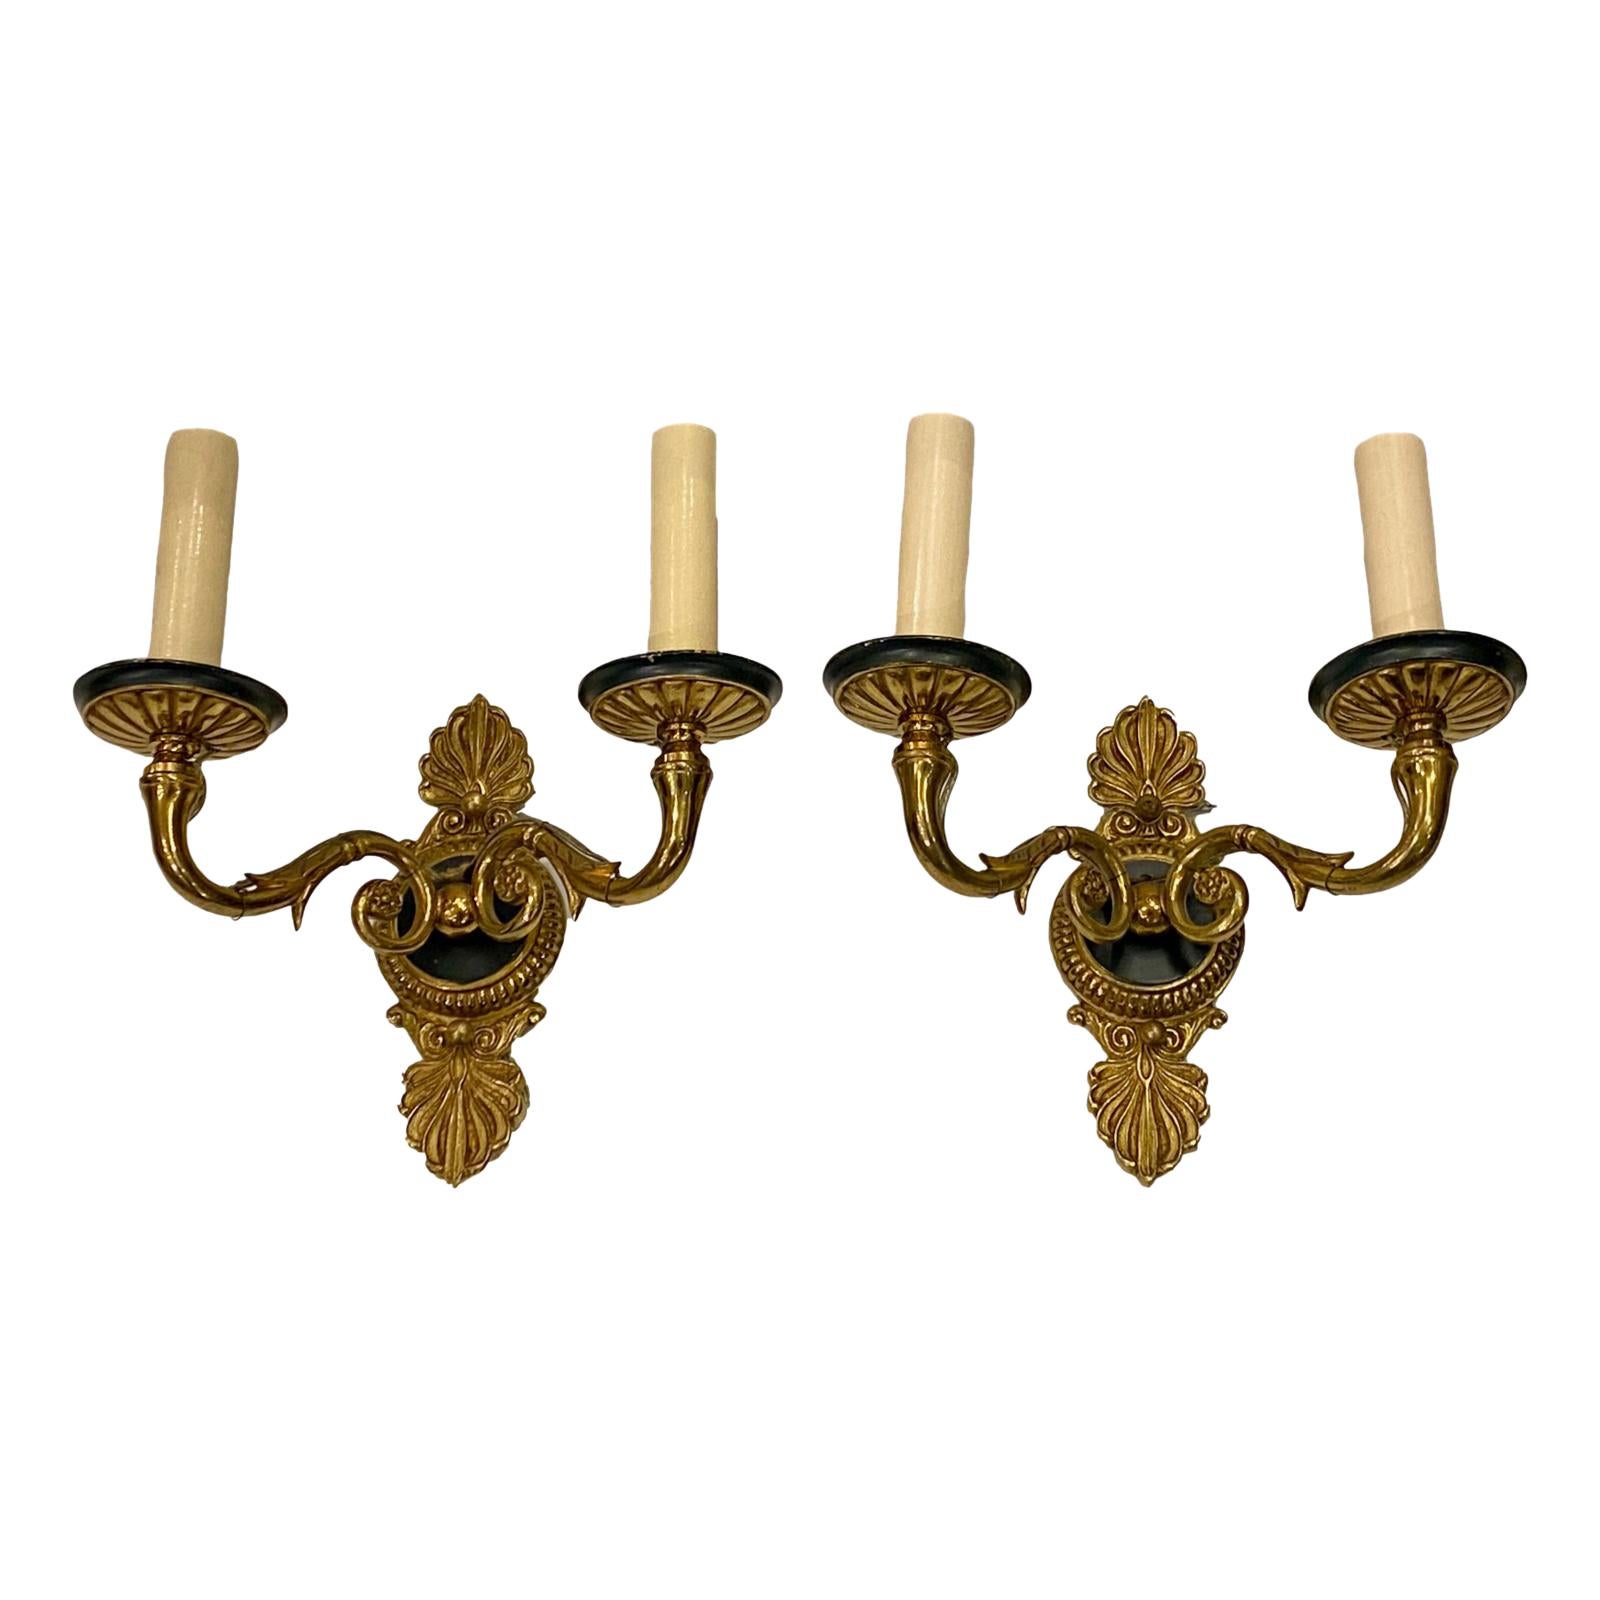 Pair of French Empire Style Sconces For Sale